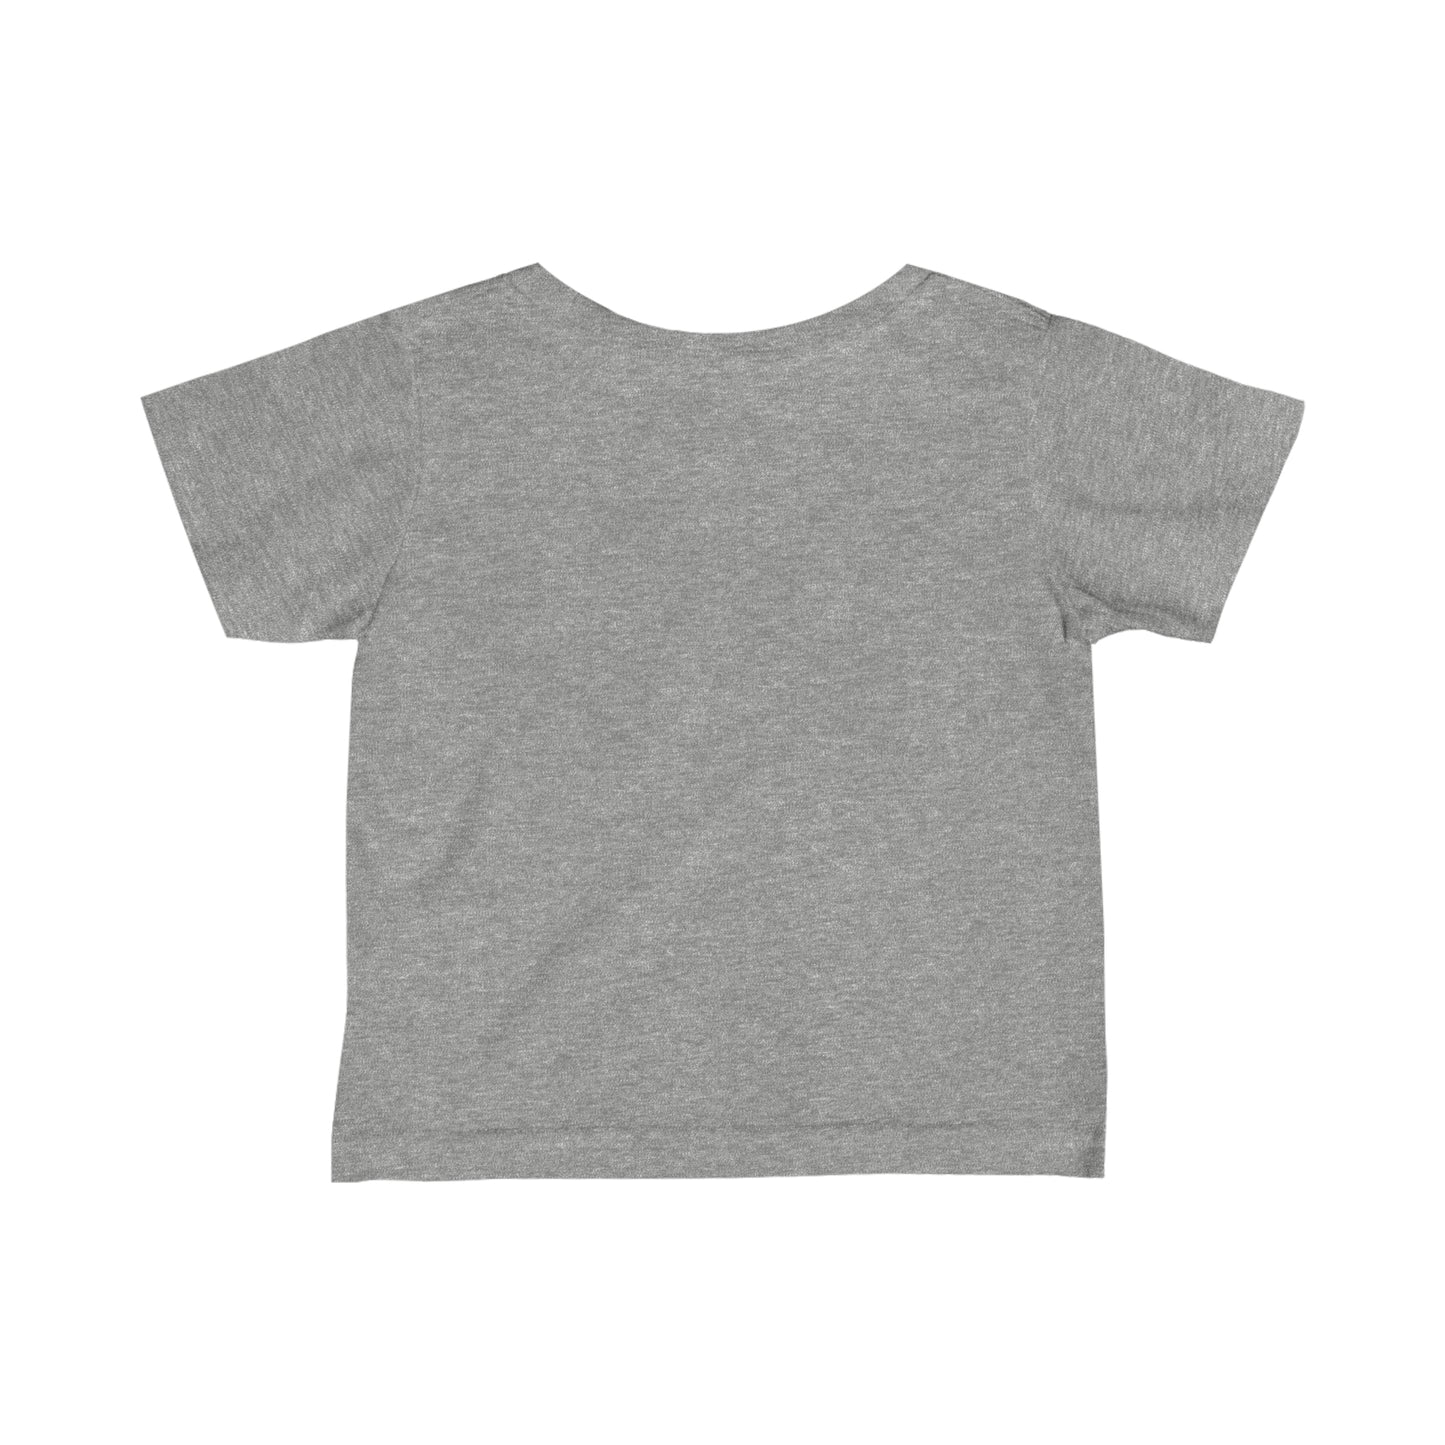 Love, New Arrival, Handle With Care- Baby, Infant, Toddler, Soft Cotton, T-Shirt